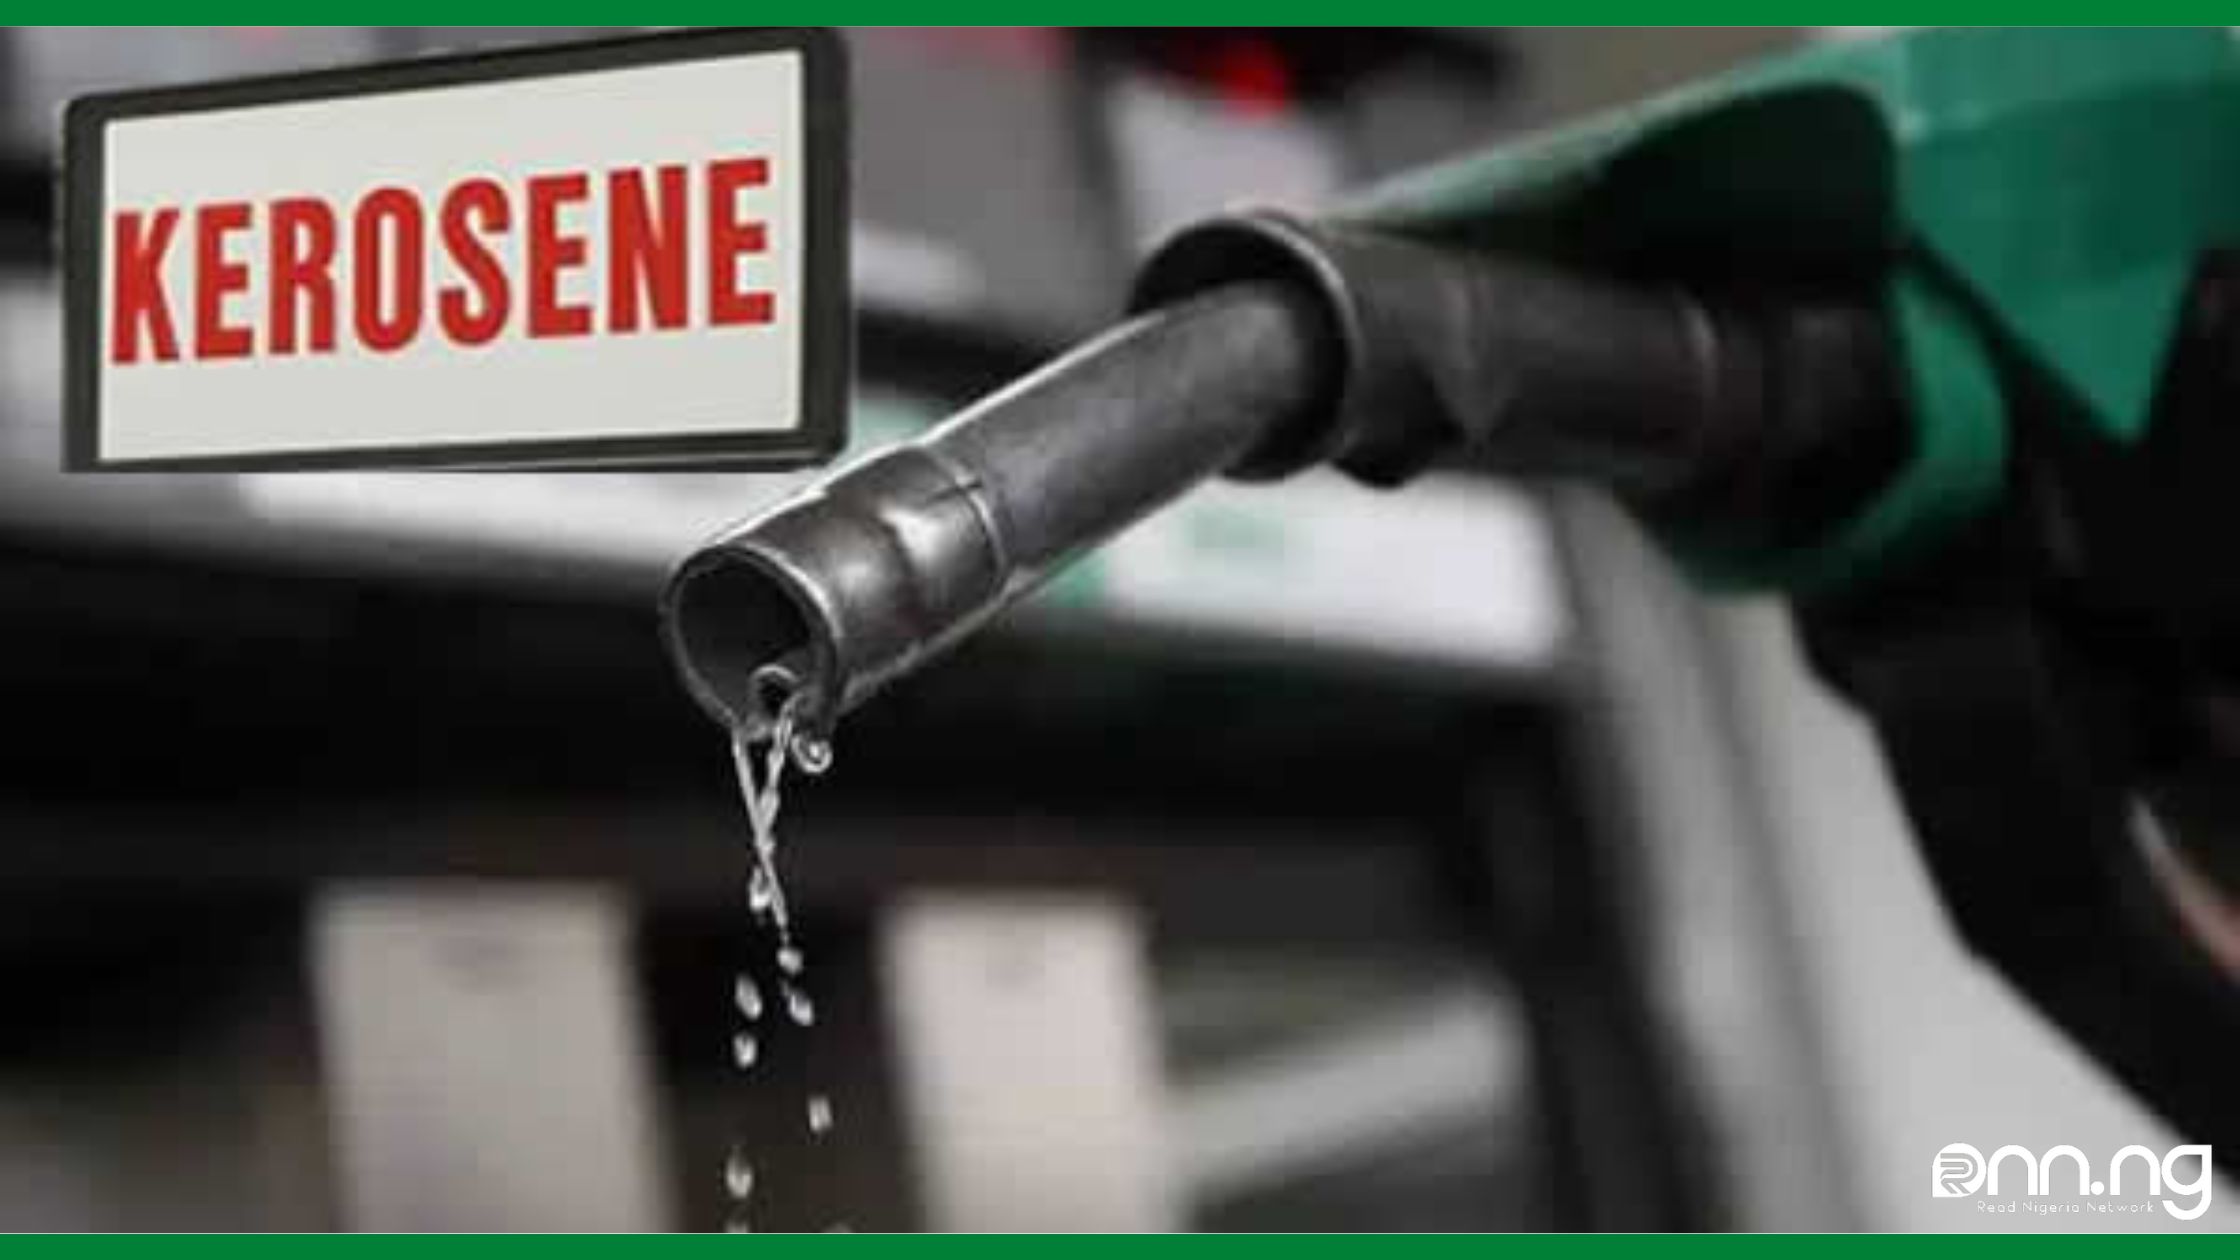 Nigerians could pay more for kerosene